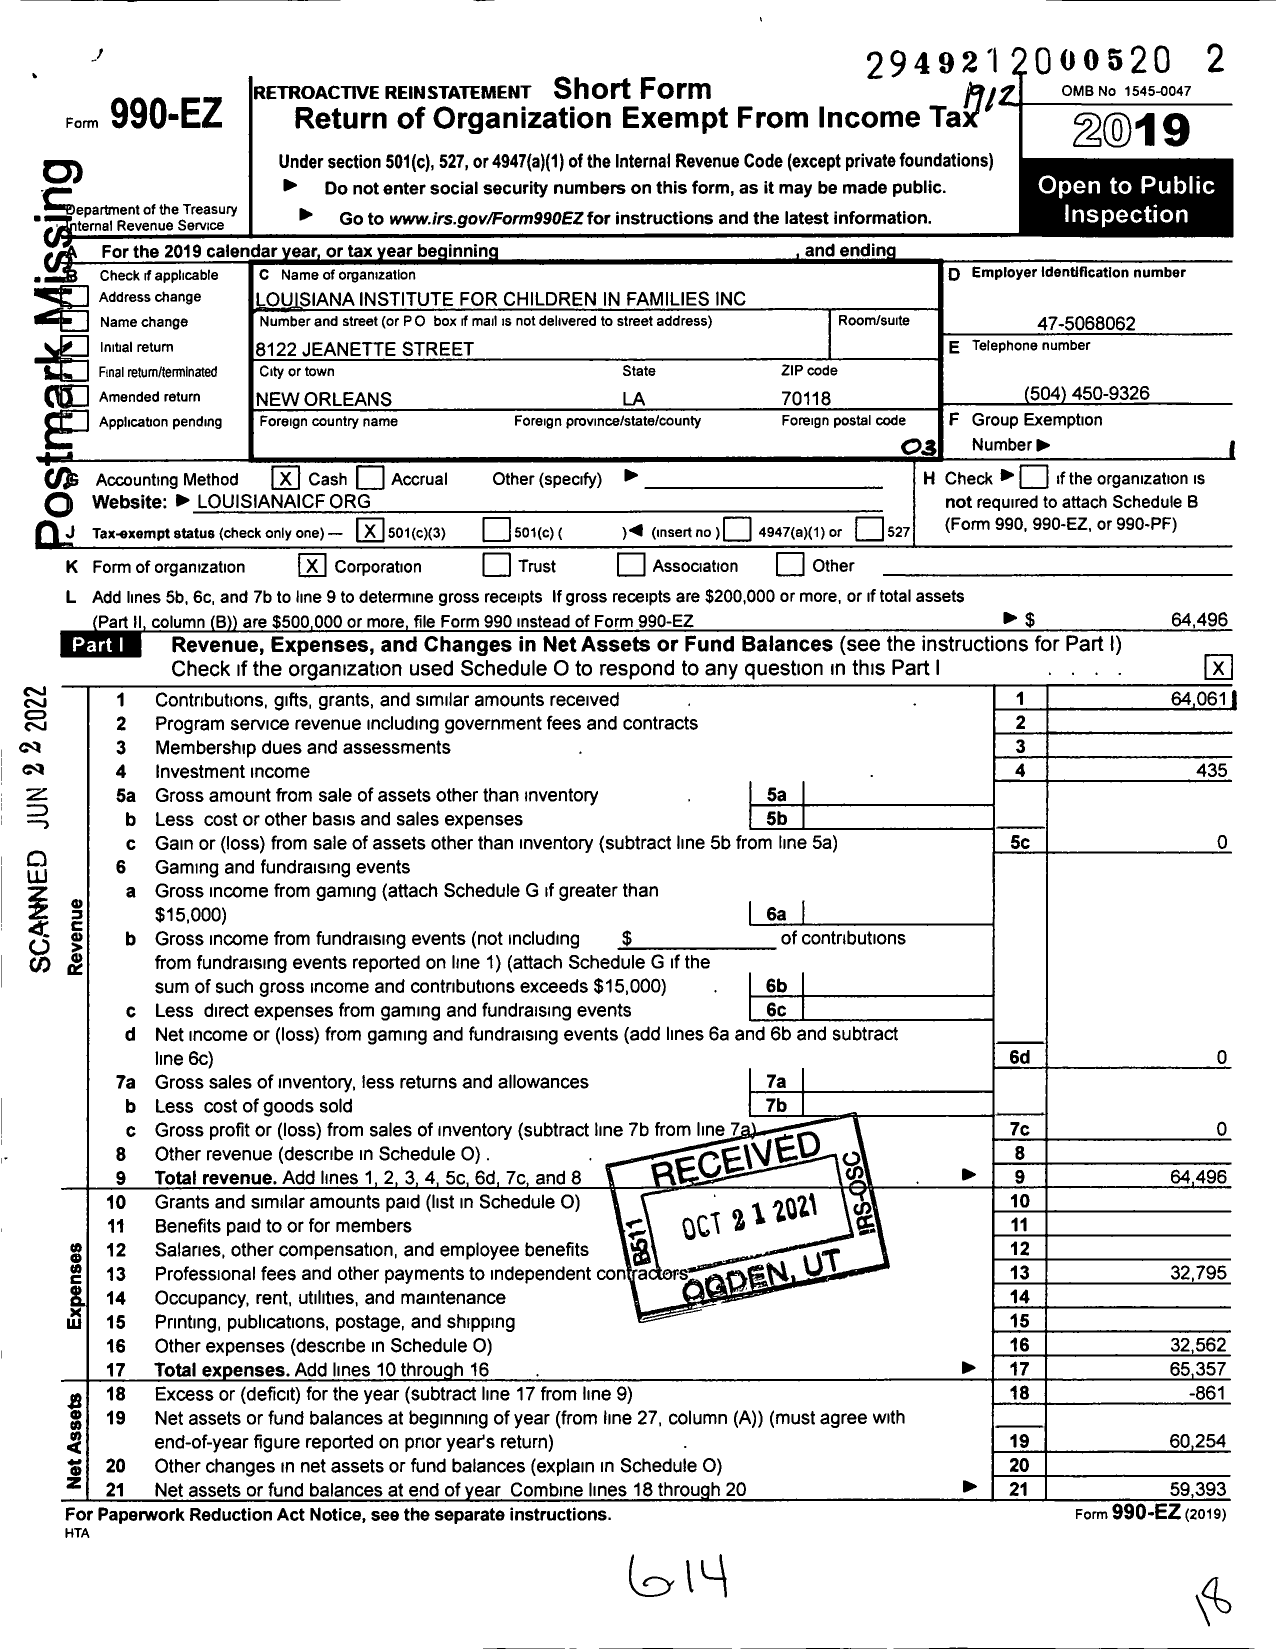 Image of first page of 2019 Form 990EZ for Louisiana Institute for Children in Families